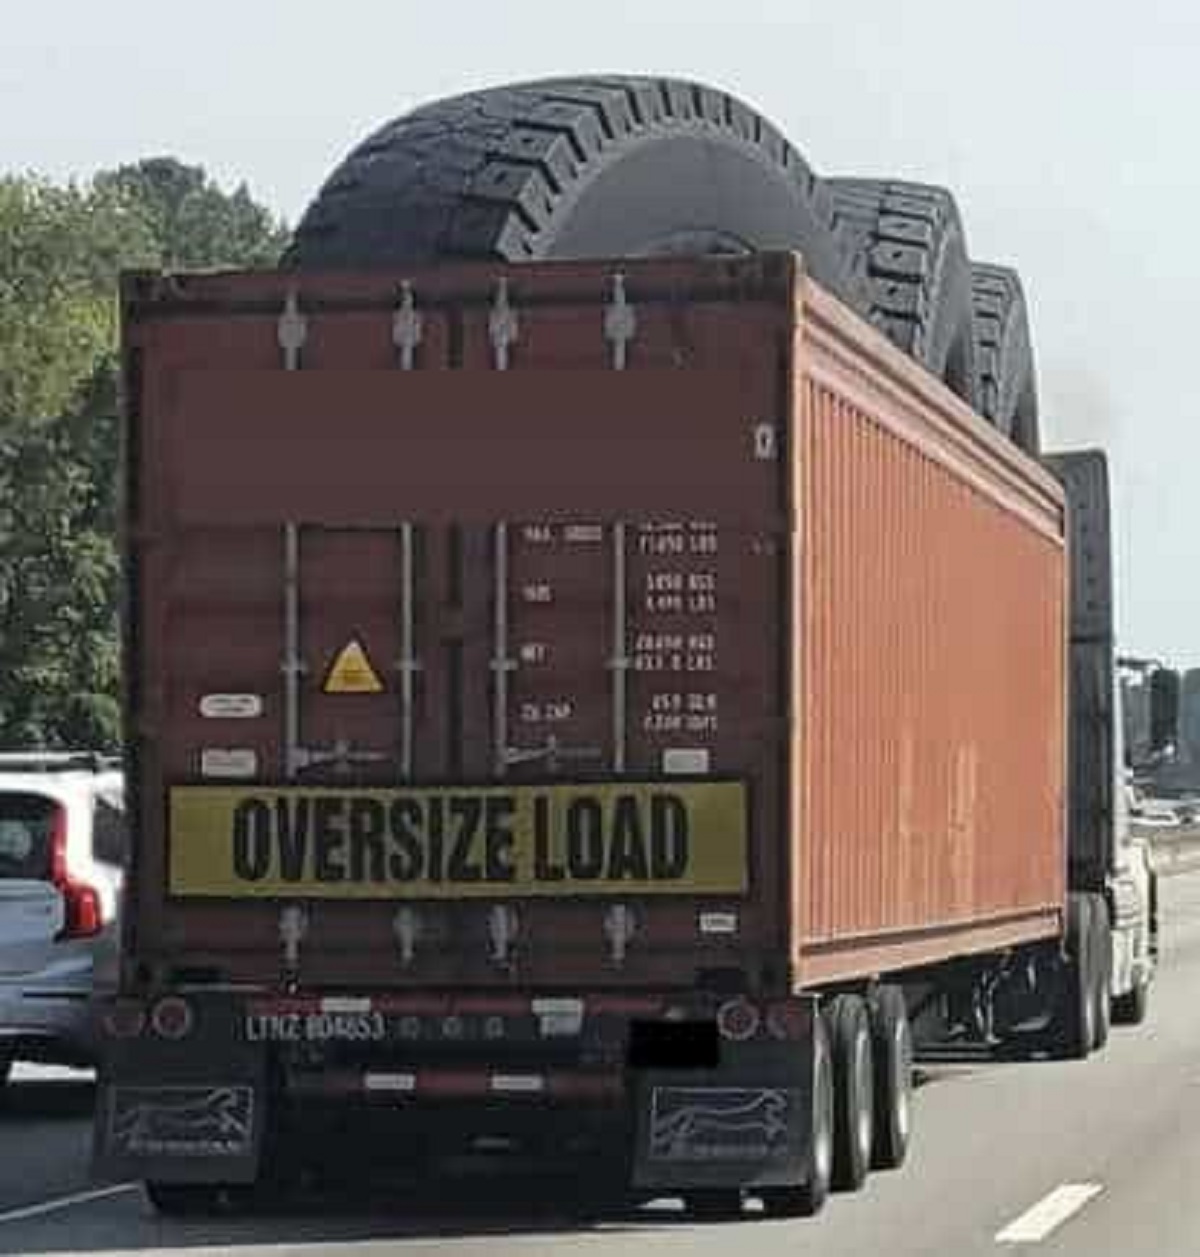 You needed to move some XL tires? Truck hauling extremely large tires.